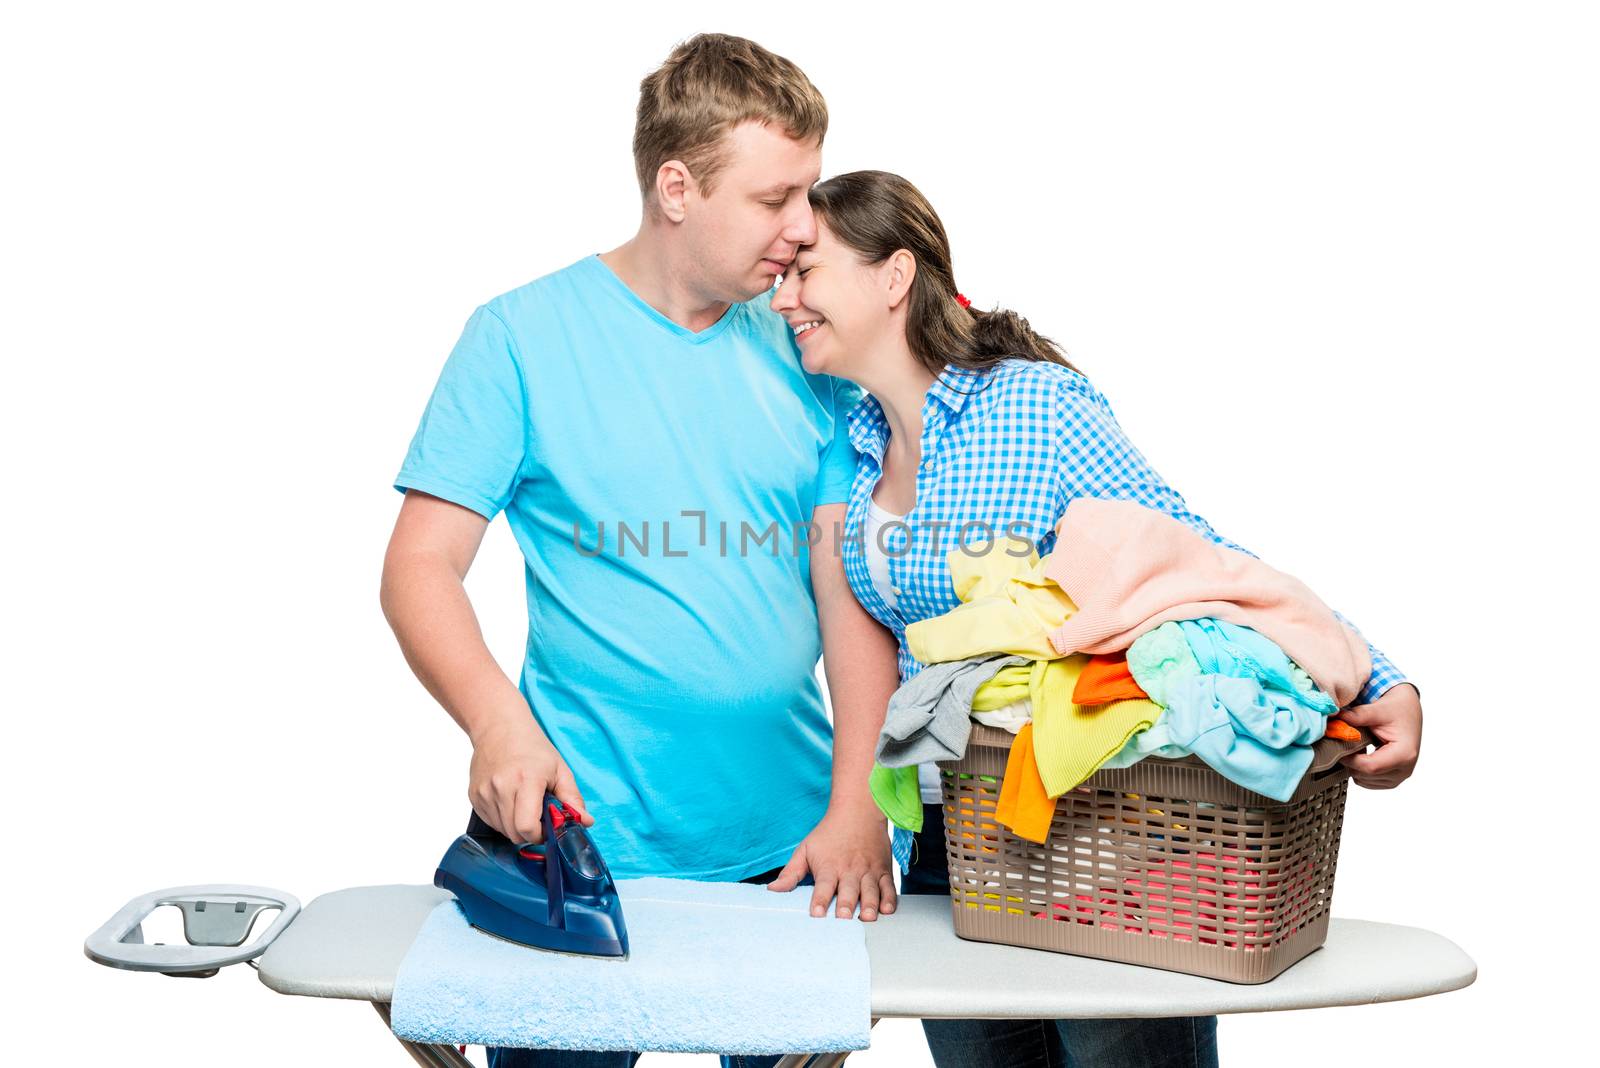 the husband helps his wife to iron clothes, help around the hous by kosmsos111